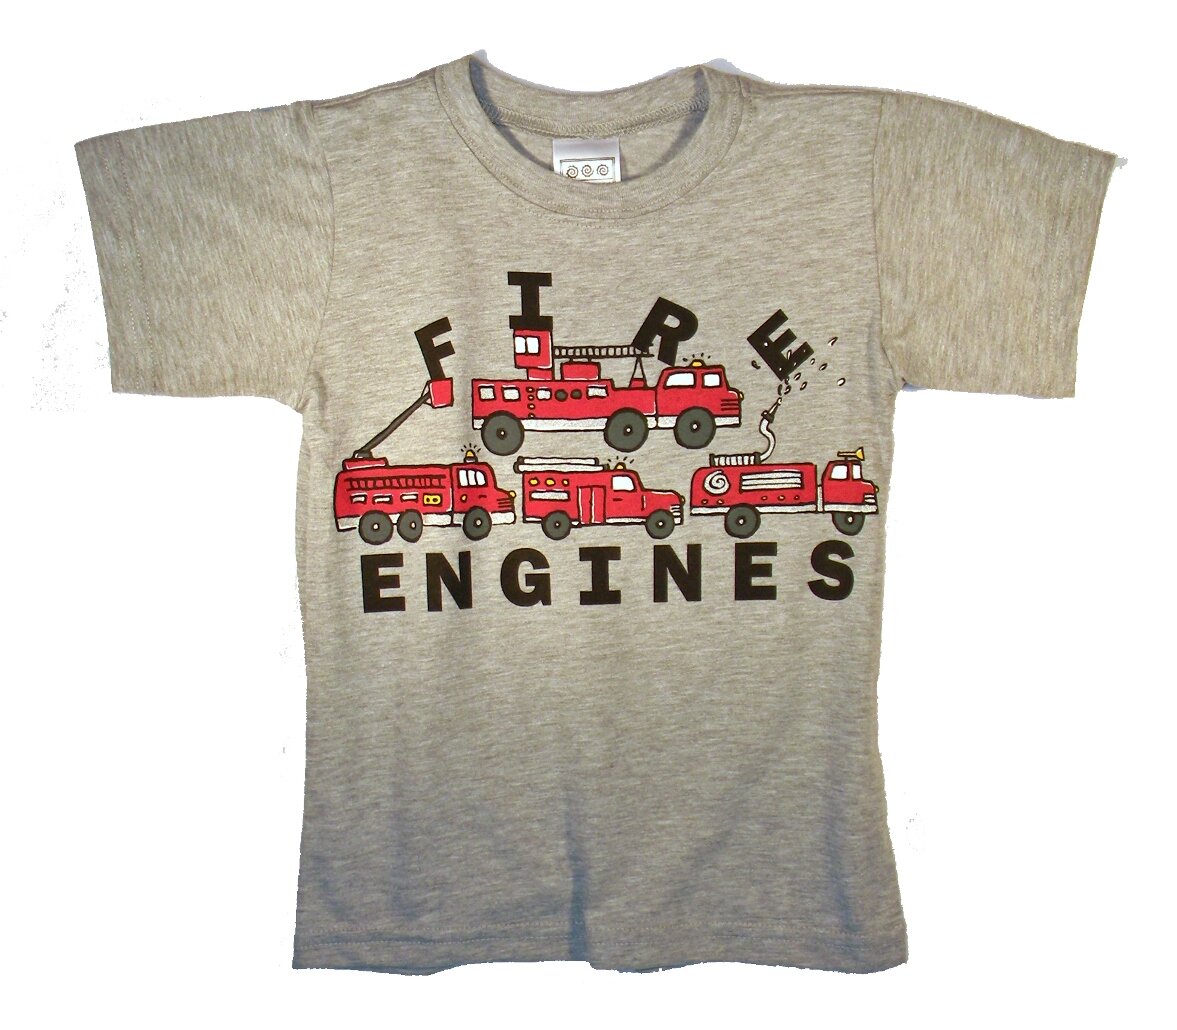 Boys' Fire Engine Shirt by Tumbleweed (Size: 2T)